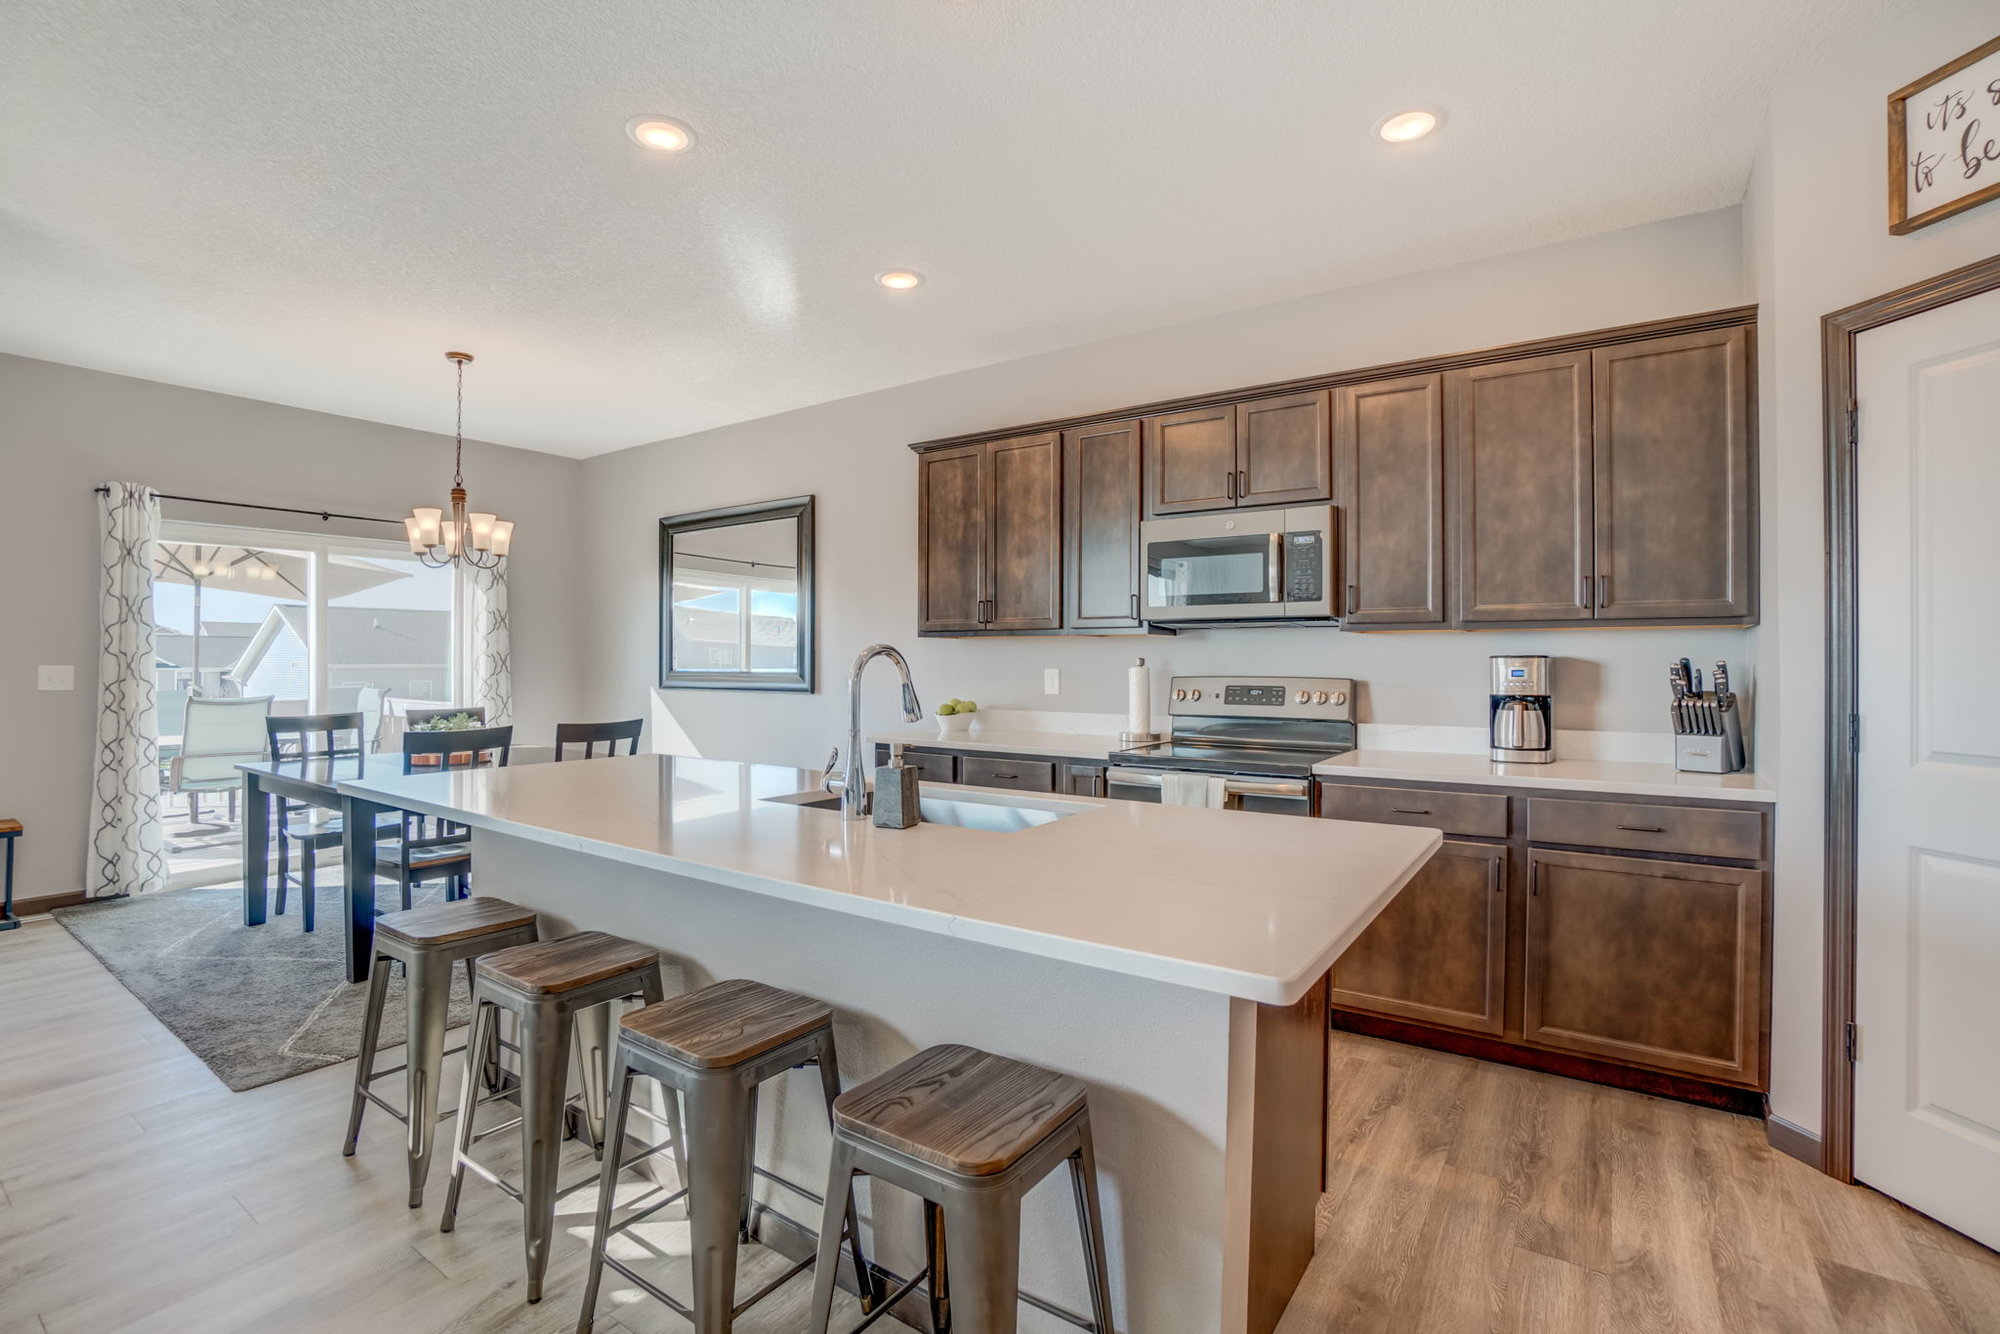 Get New Construction Amenities Without the Building Process in this Stunning Cedar Falls Home